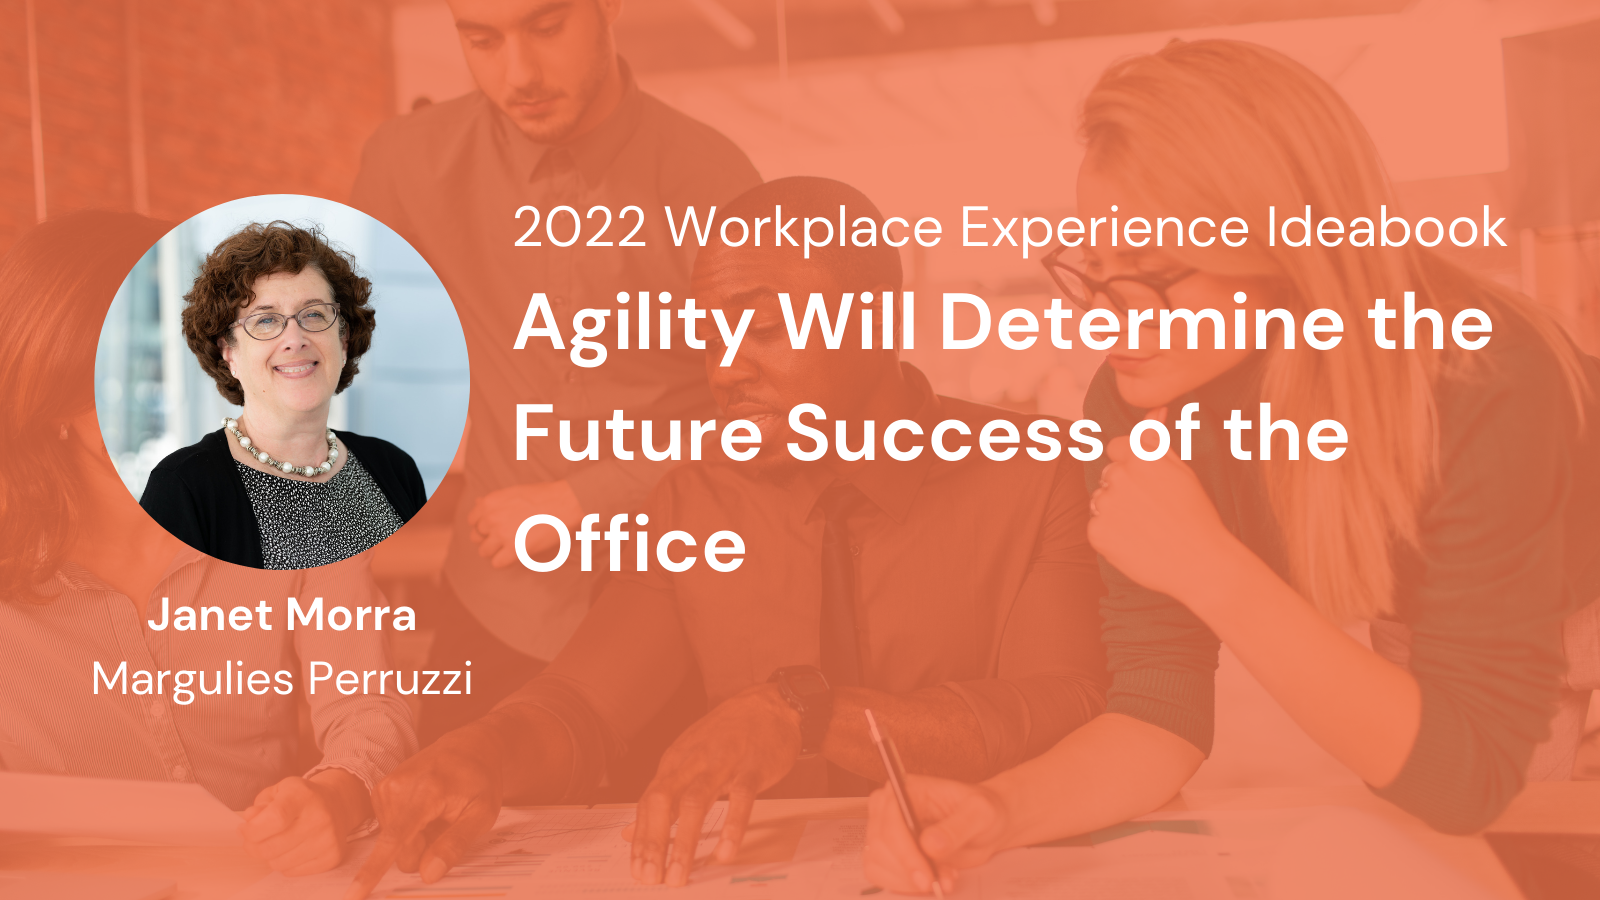 Agility Will Determine the Future Success of the Office - Janet Morra